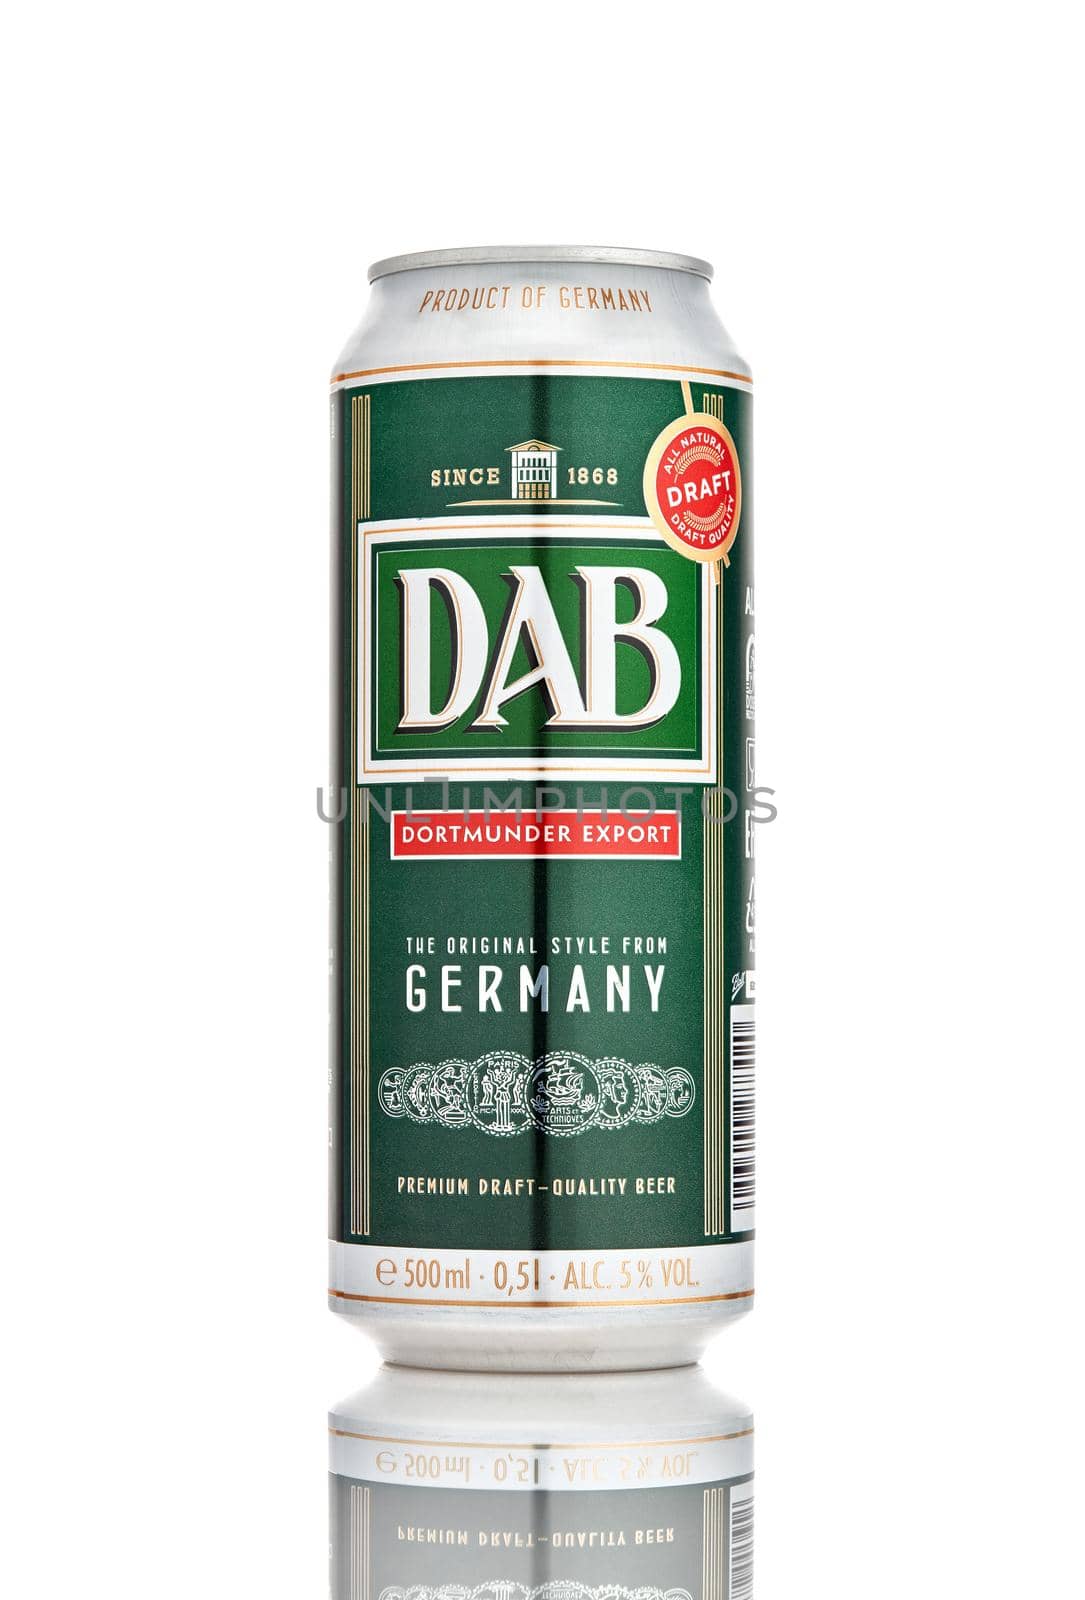 German beer DAB Dortmunder Export in can on white background. Premium draft - quality beer since 1868. 21.06.2019, Rostov-on-Don, Russia. by EvgeniyQW